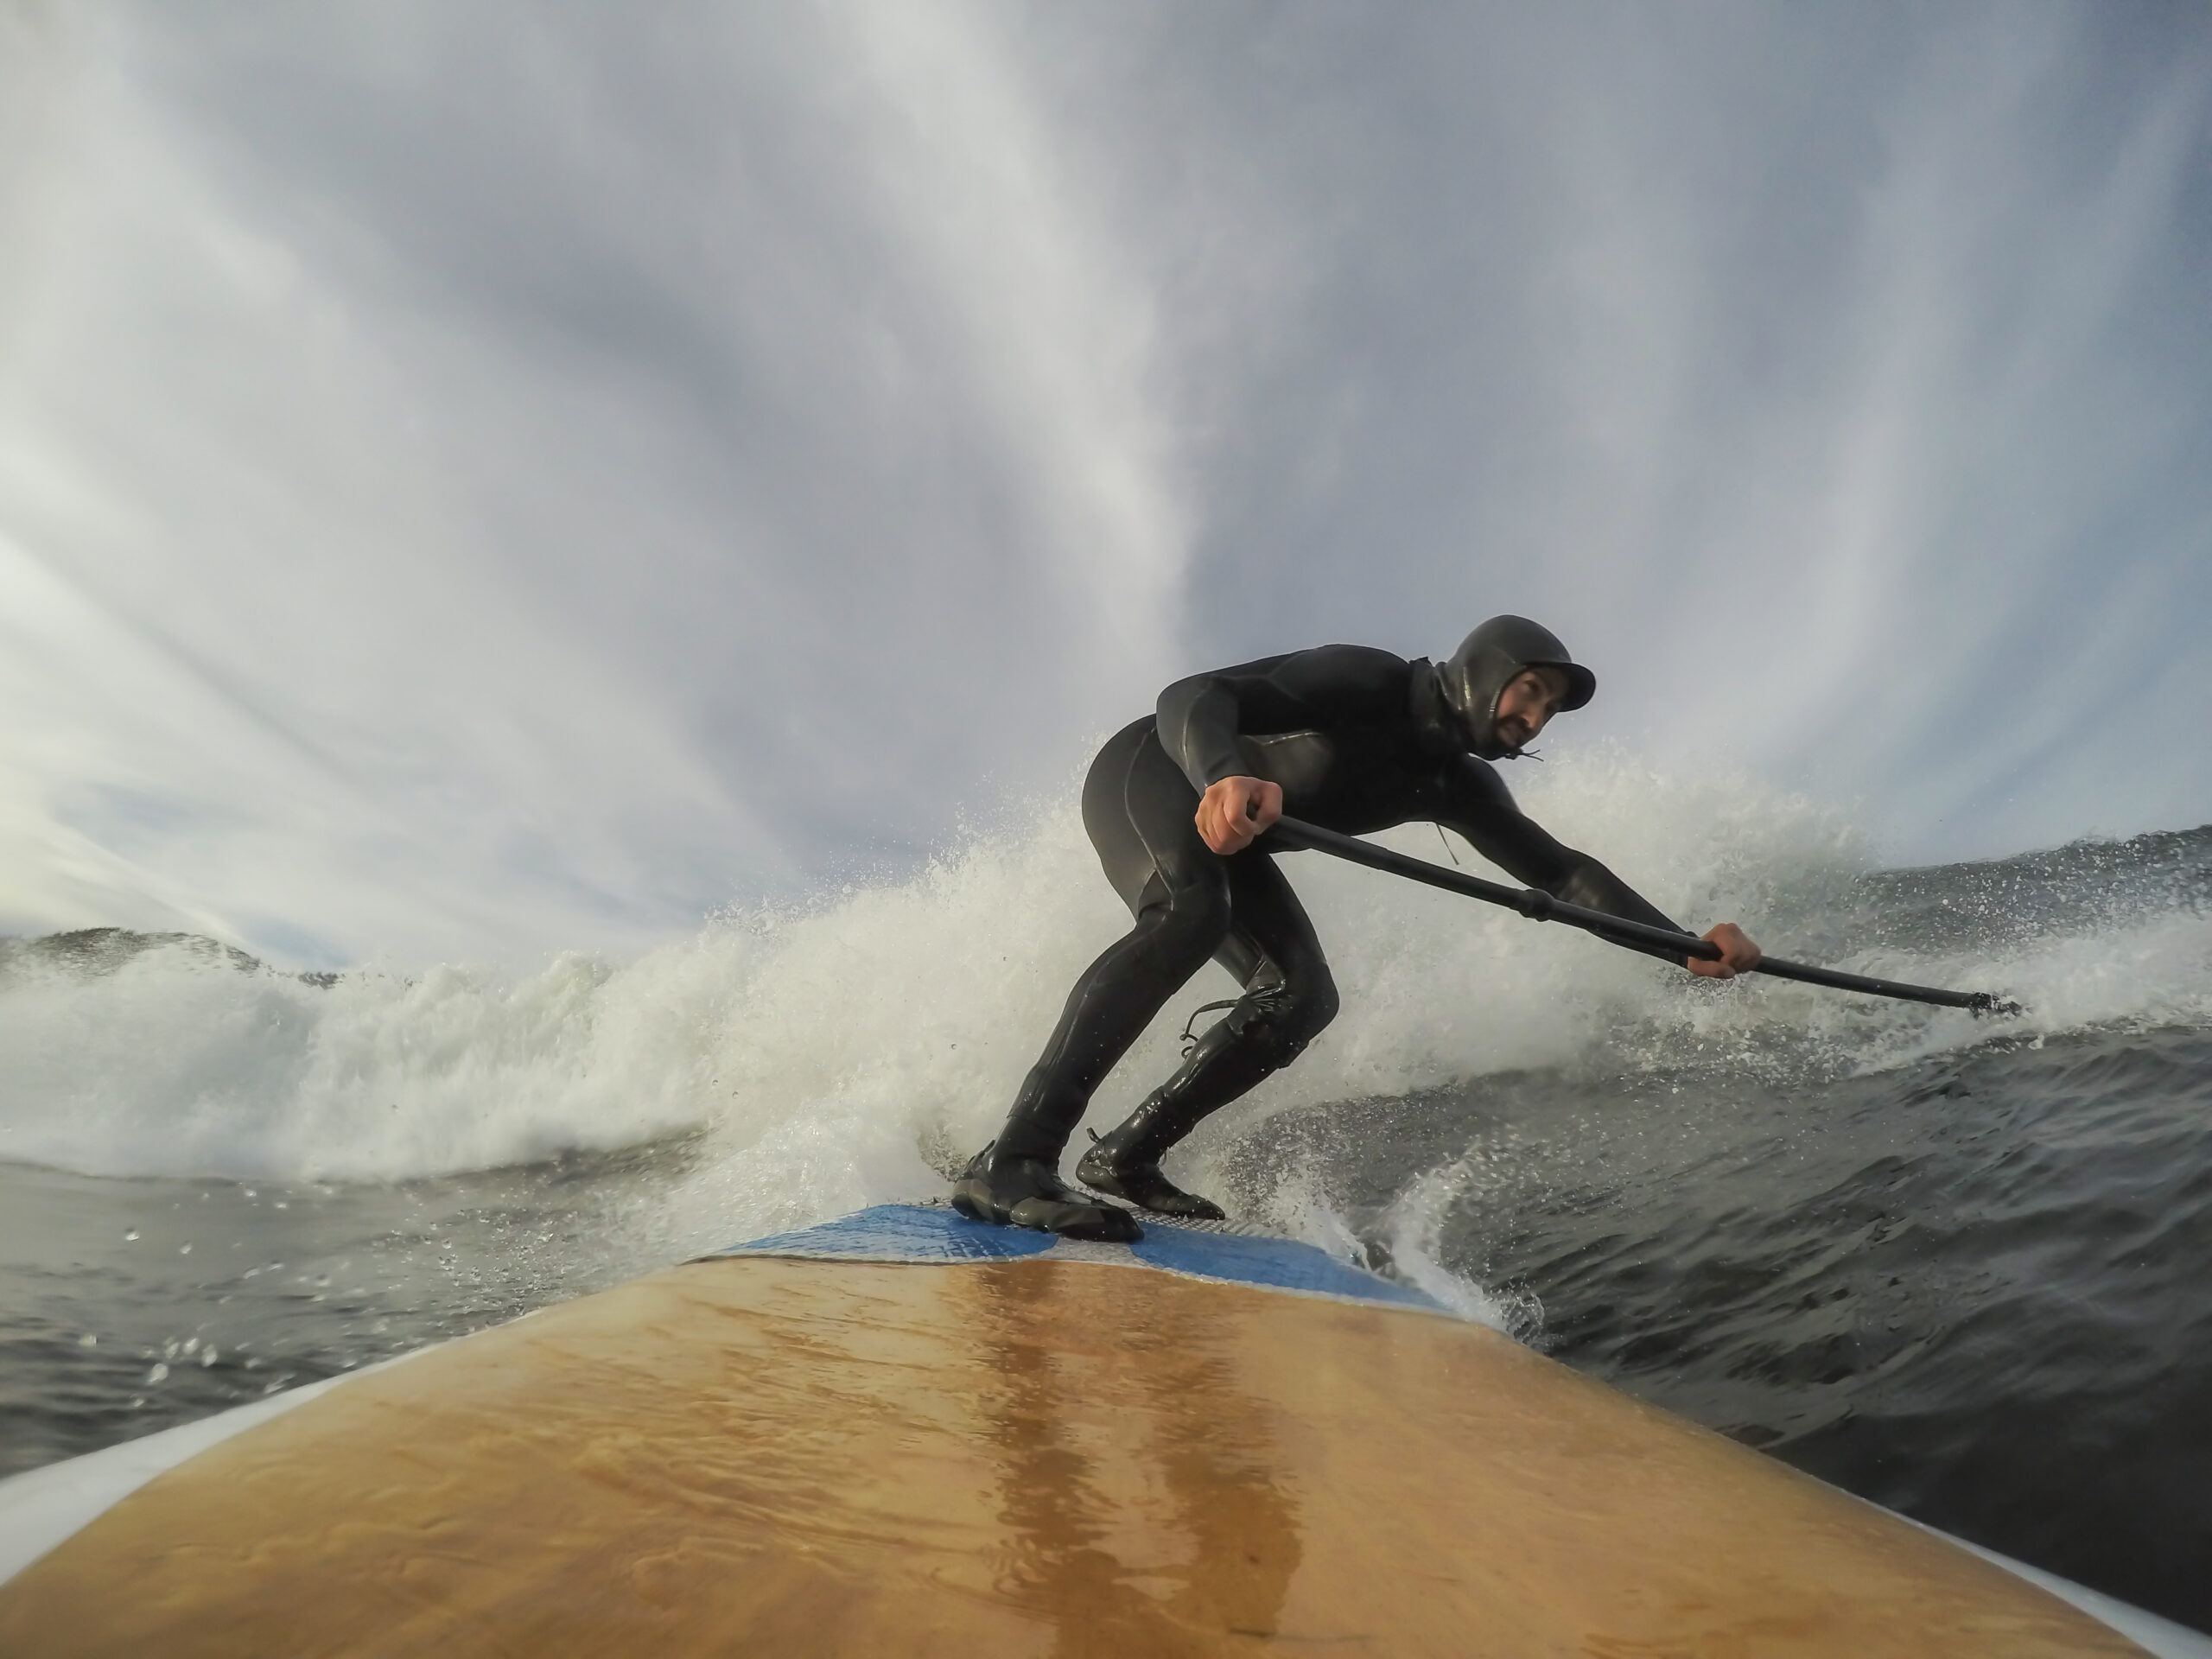 Man Paddle Boarding and Riding Waves